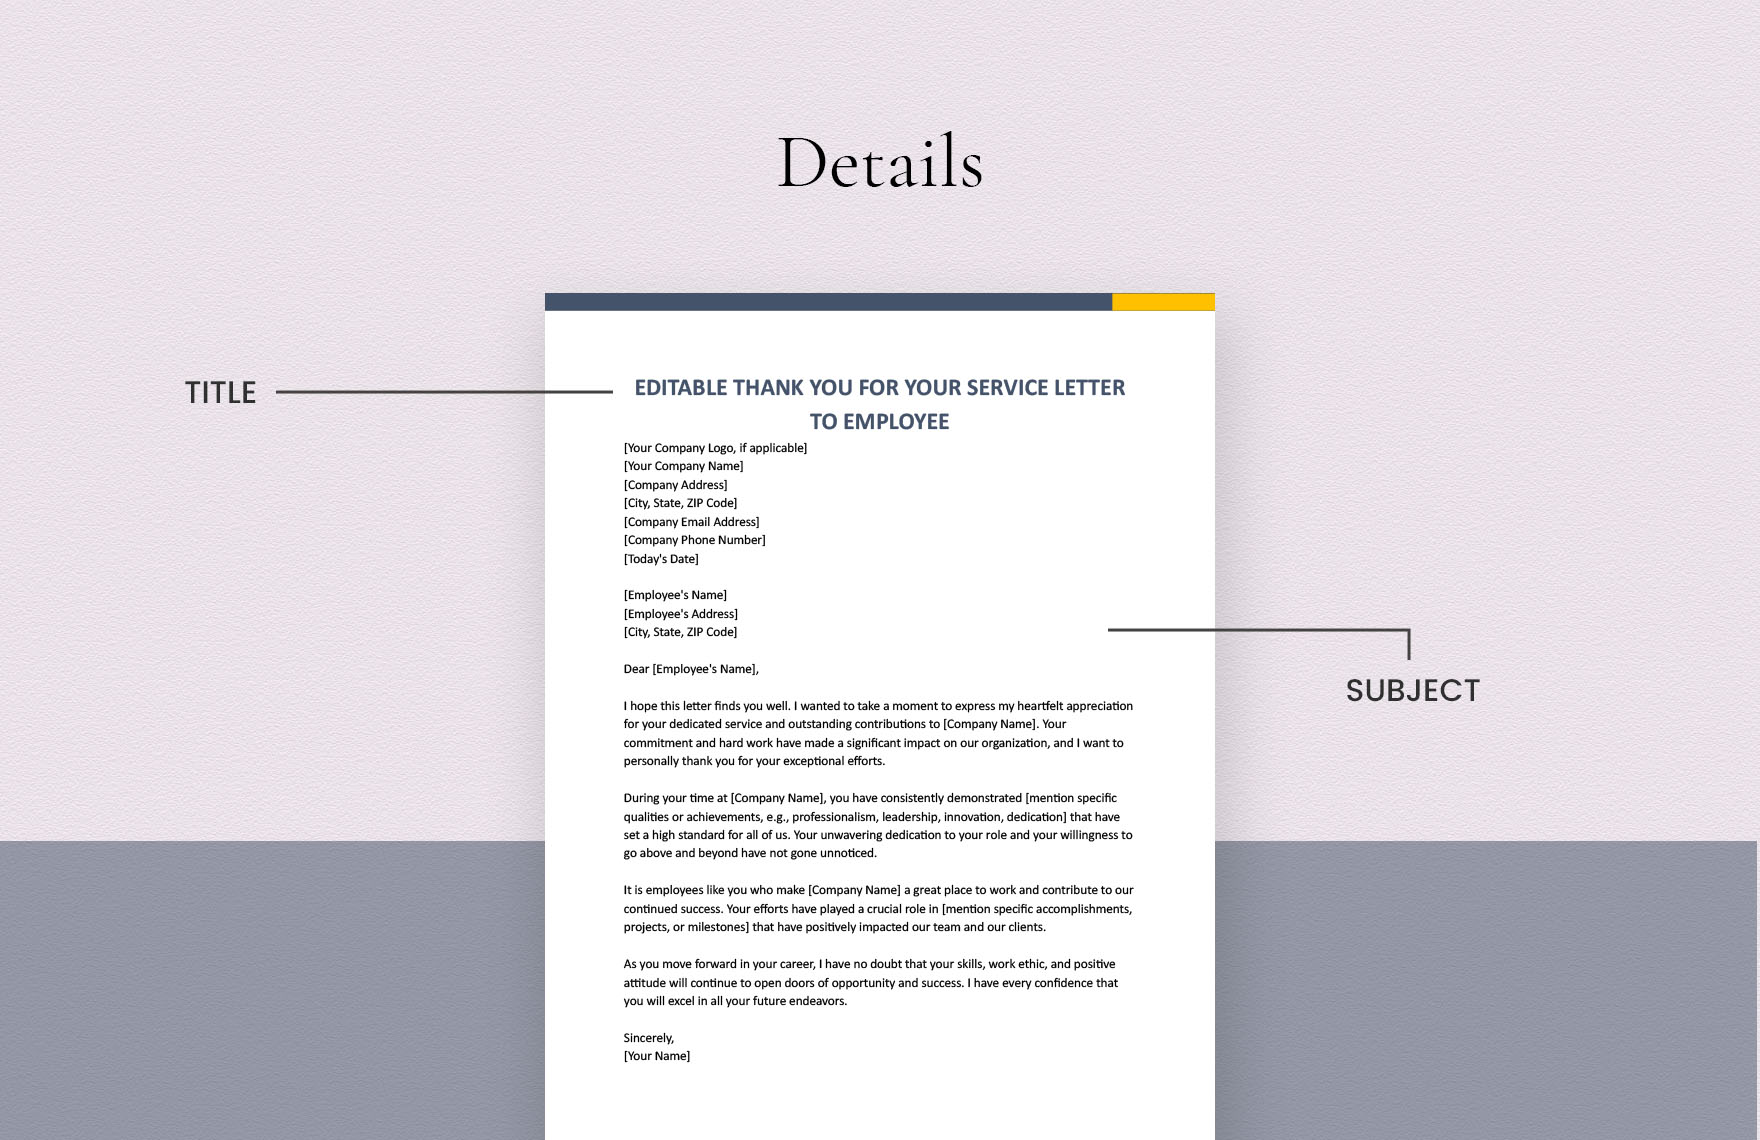 Editable Thank You For Your Service Letter to Employee Template